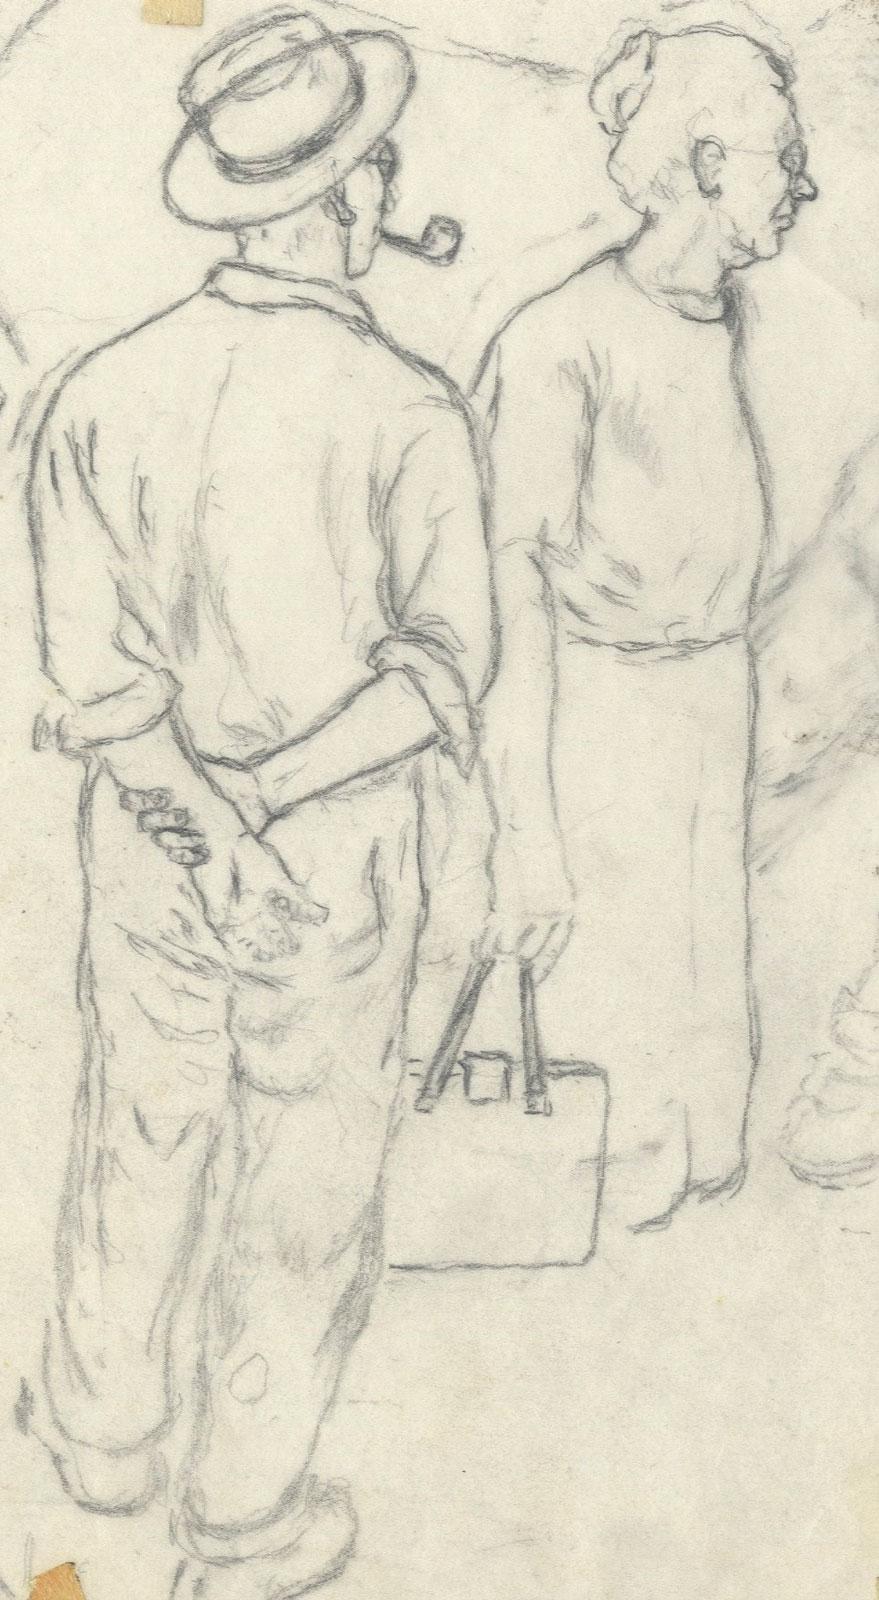 Jackson Lee Nesbitt Figurative Art - sketch of man with pipe and woman with purse